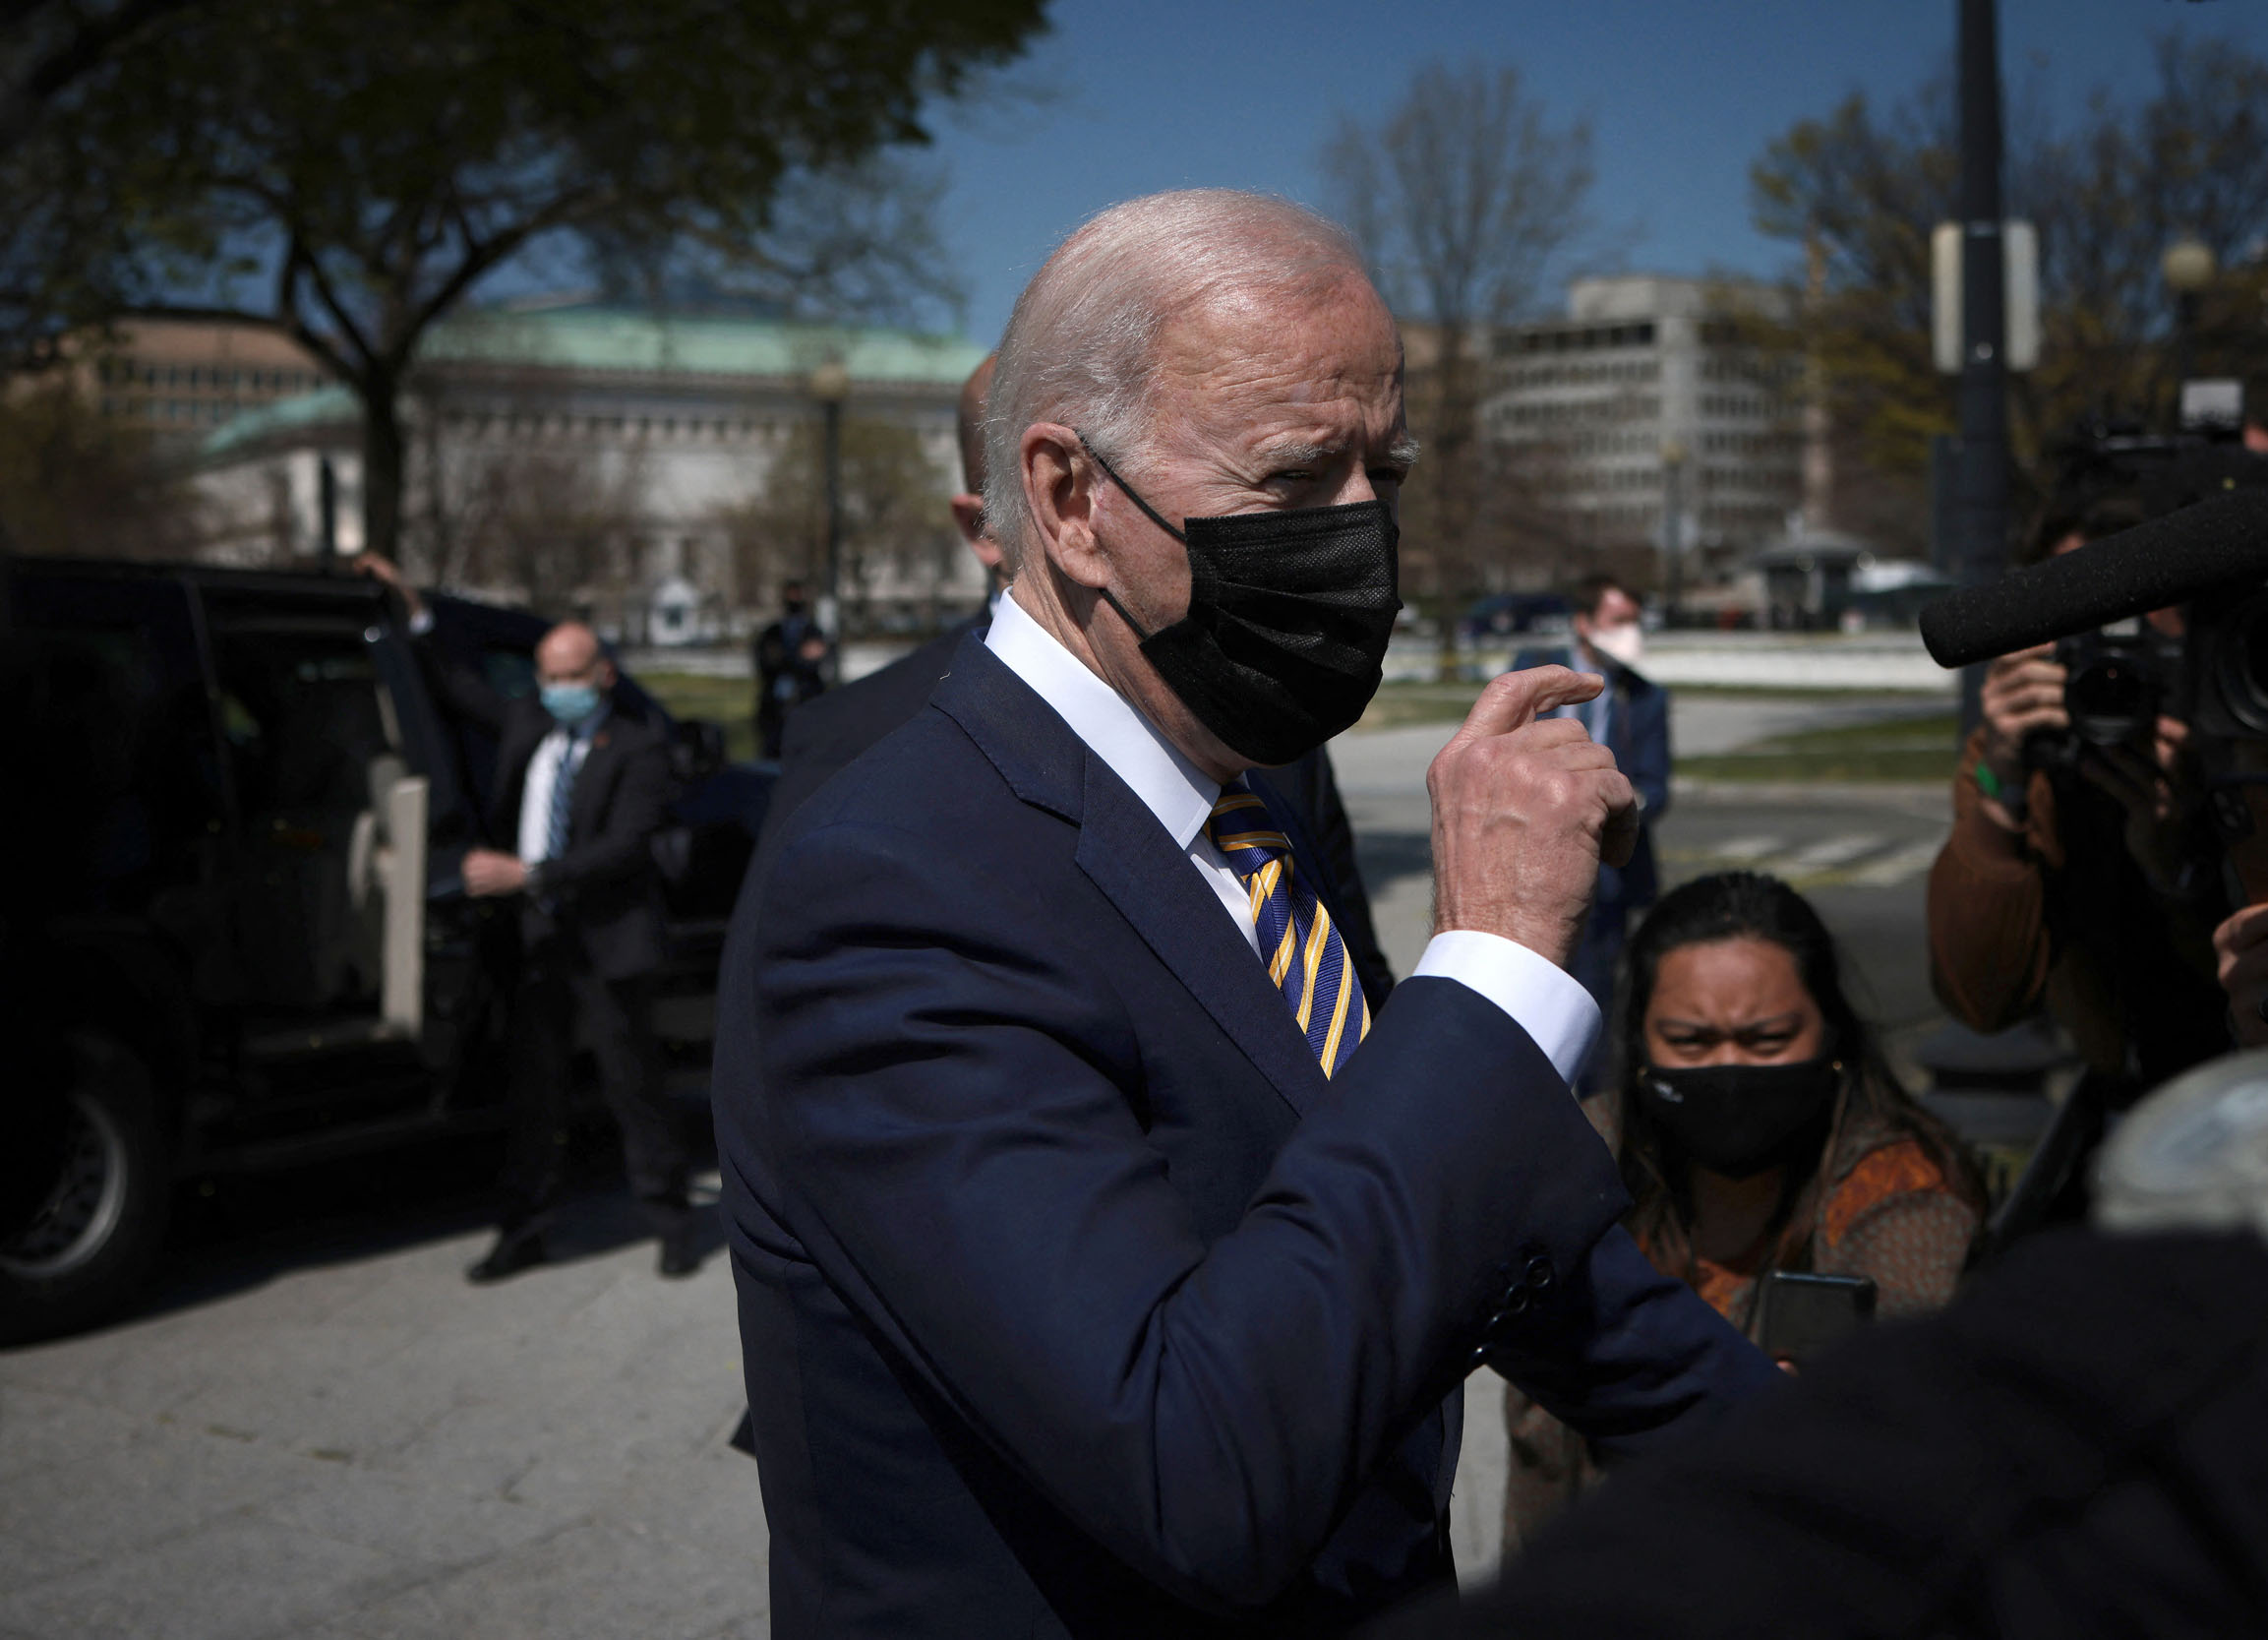 WASHINGTON, DC - APRIL 05: U.S. President Joe Biden answers questions while returning to the White House on April 05, 2021 in Washington, DC. Biden answered questions on his planned infrastructure package after spending the weekend at Camp David. Win McNamee/Getty Images/AFP (Photo by WIN MCNAMEE / GETTY IMAGES NORTH AMERICA / Getty Images via AFP)